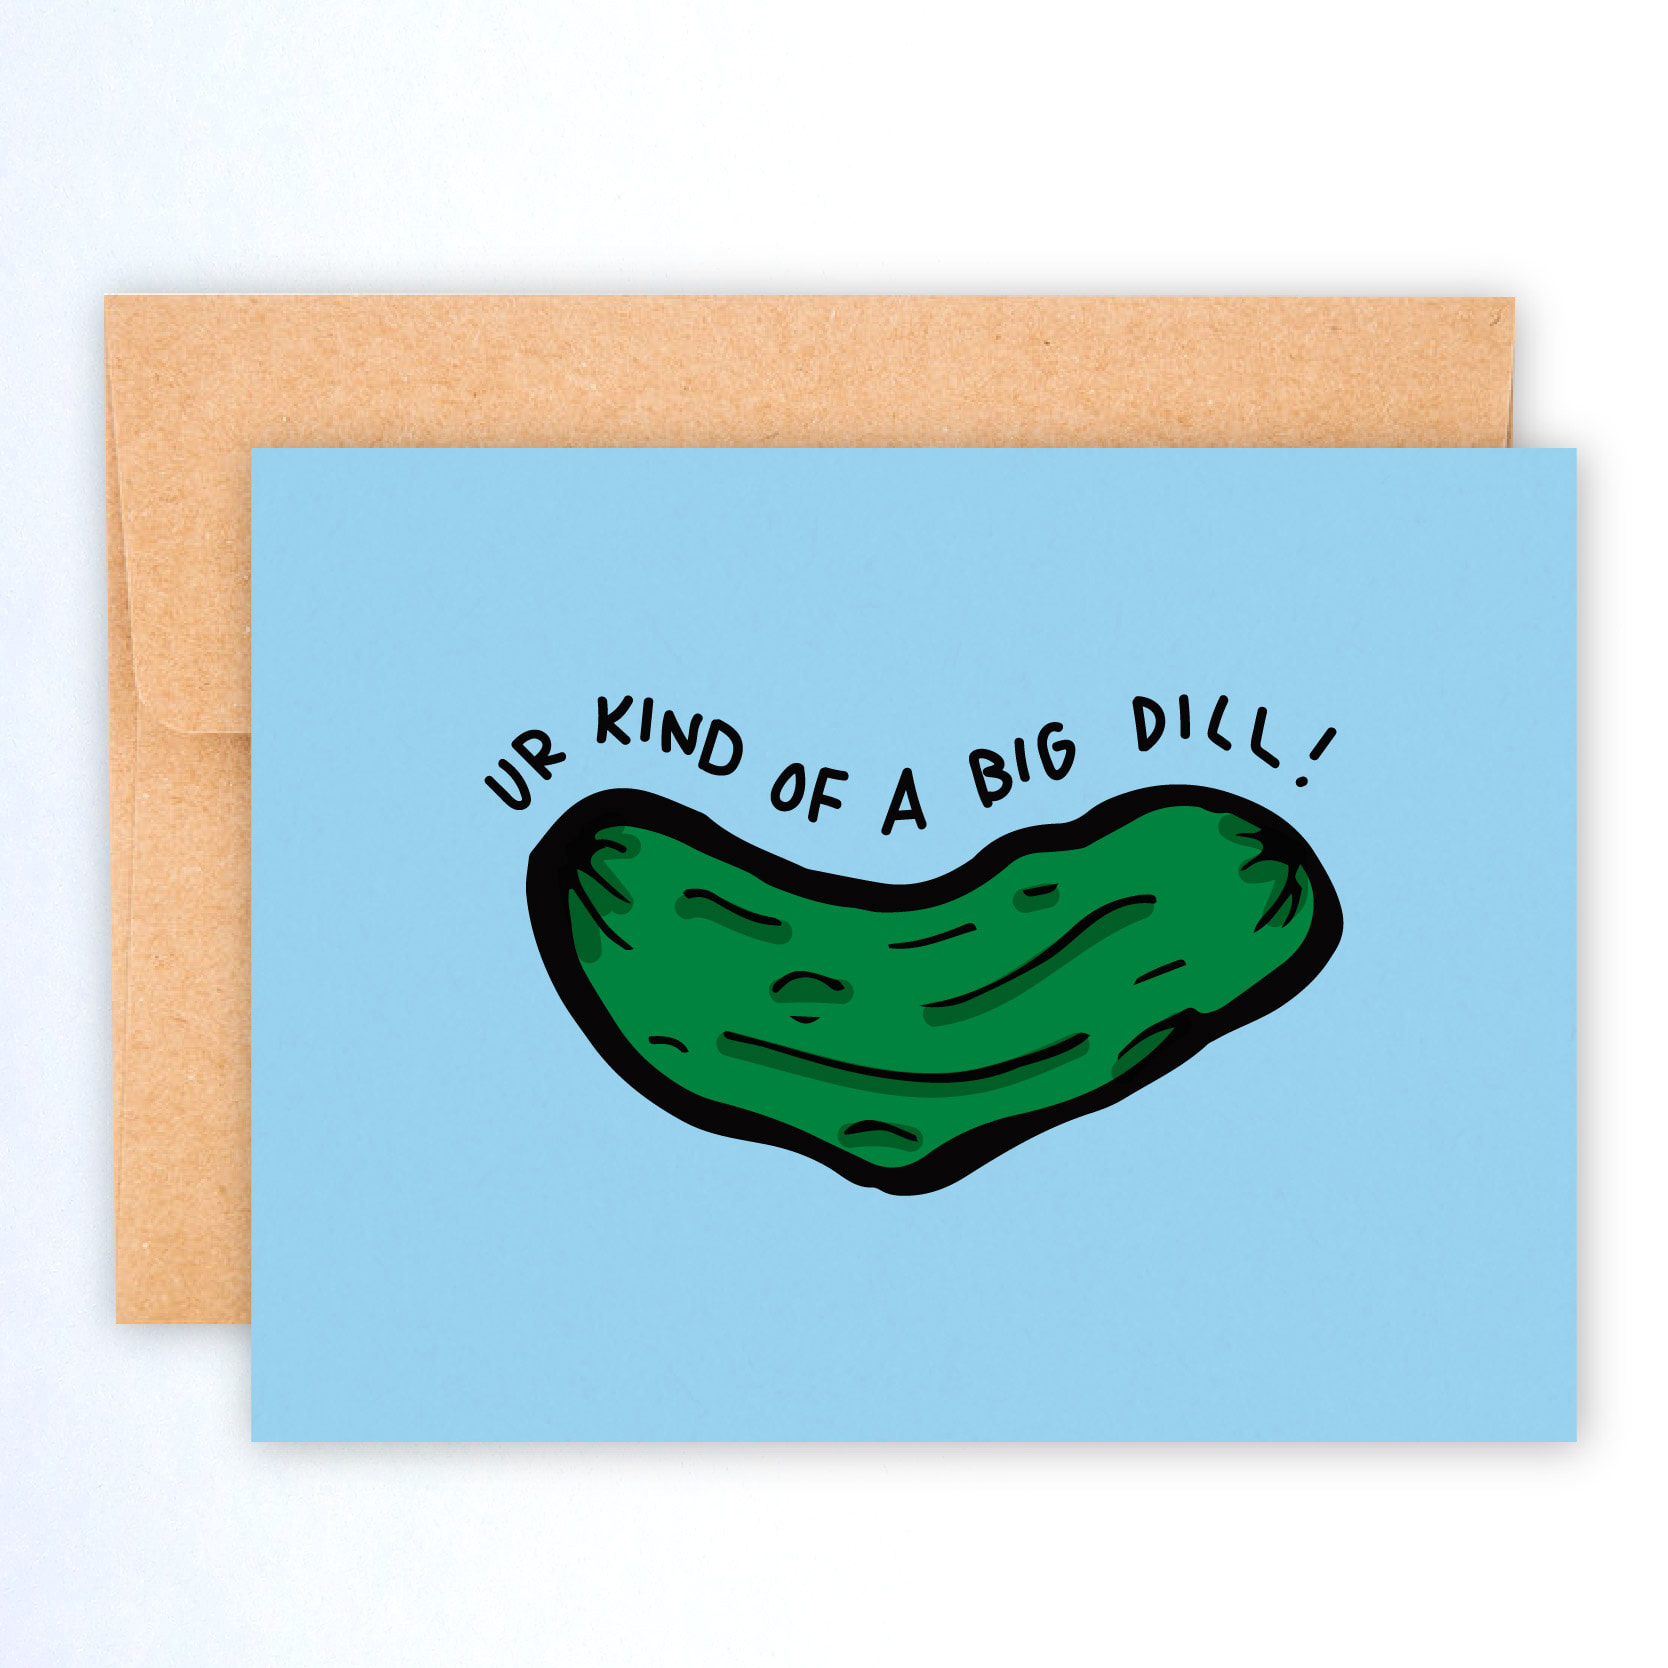 Gehoorzaam Zuinig Verslaggever Ur Kind of a Big Dill A2 Greeting Card 5.5"x4.25" with Envelope ~ Pickle  Pickles Congratulations Congrats Great Job